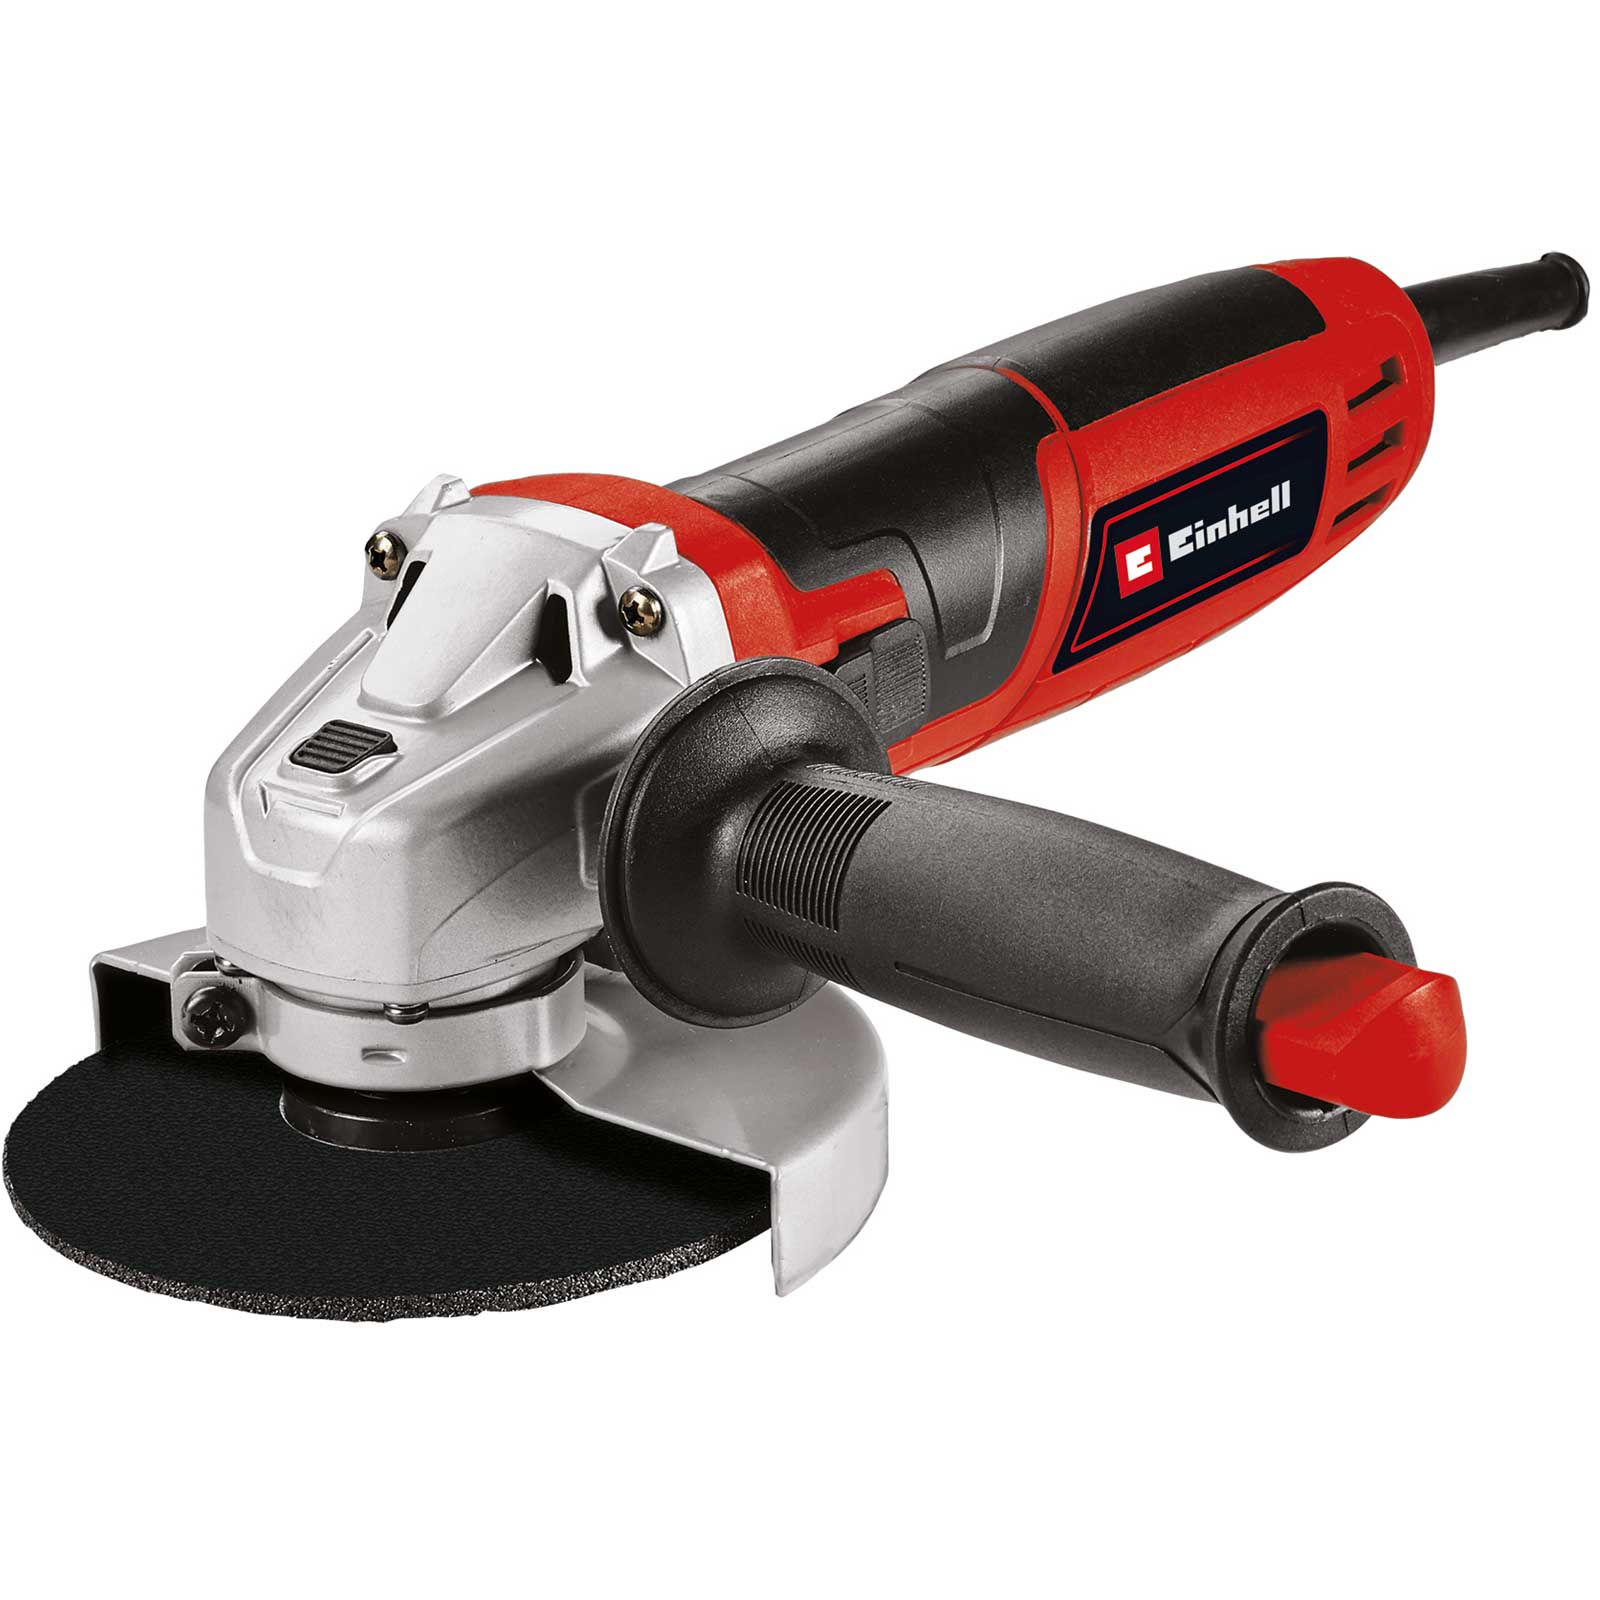 Image of Einhell TC-AG 115/750 Angle Grinder 115mm